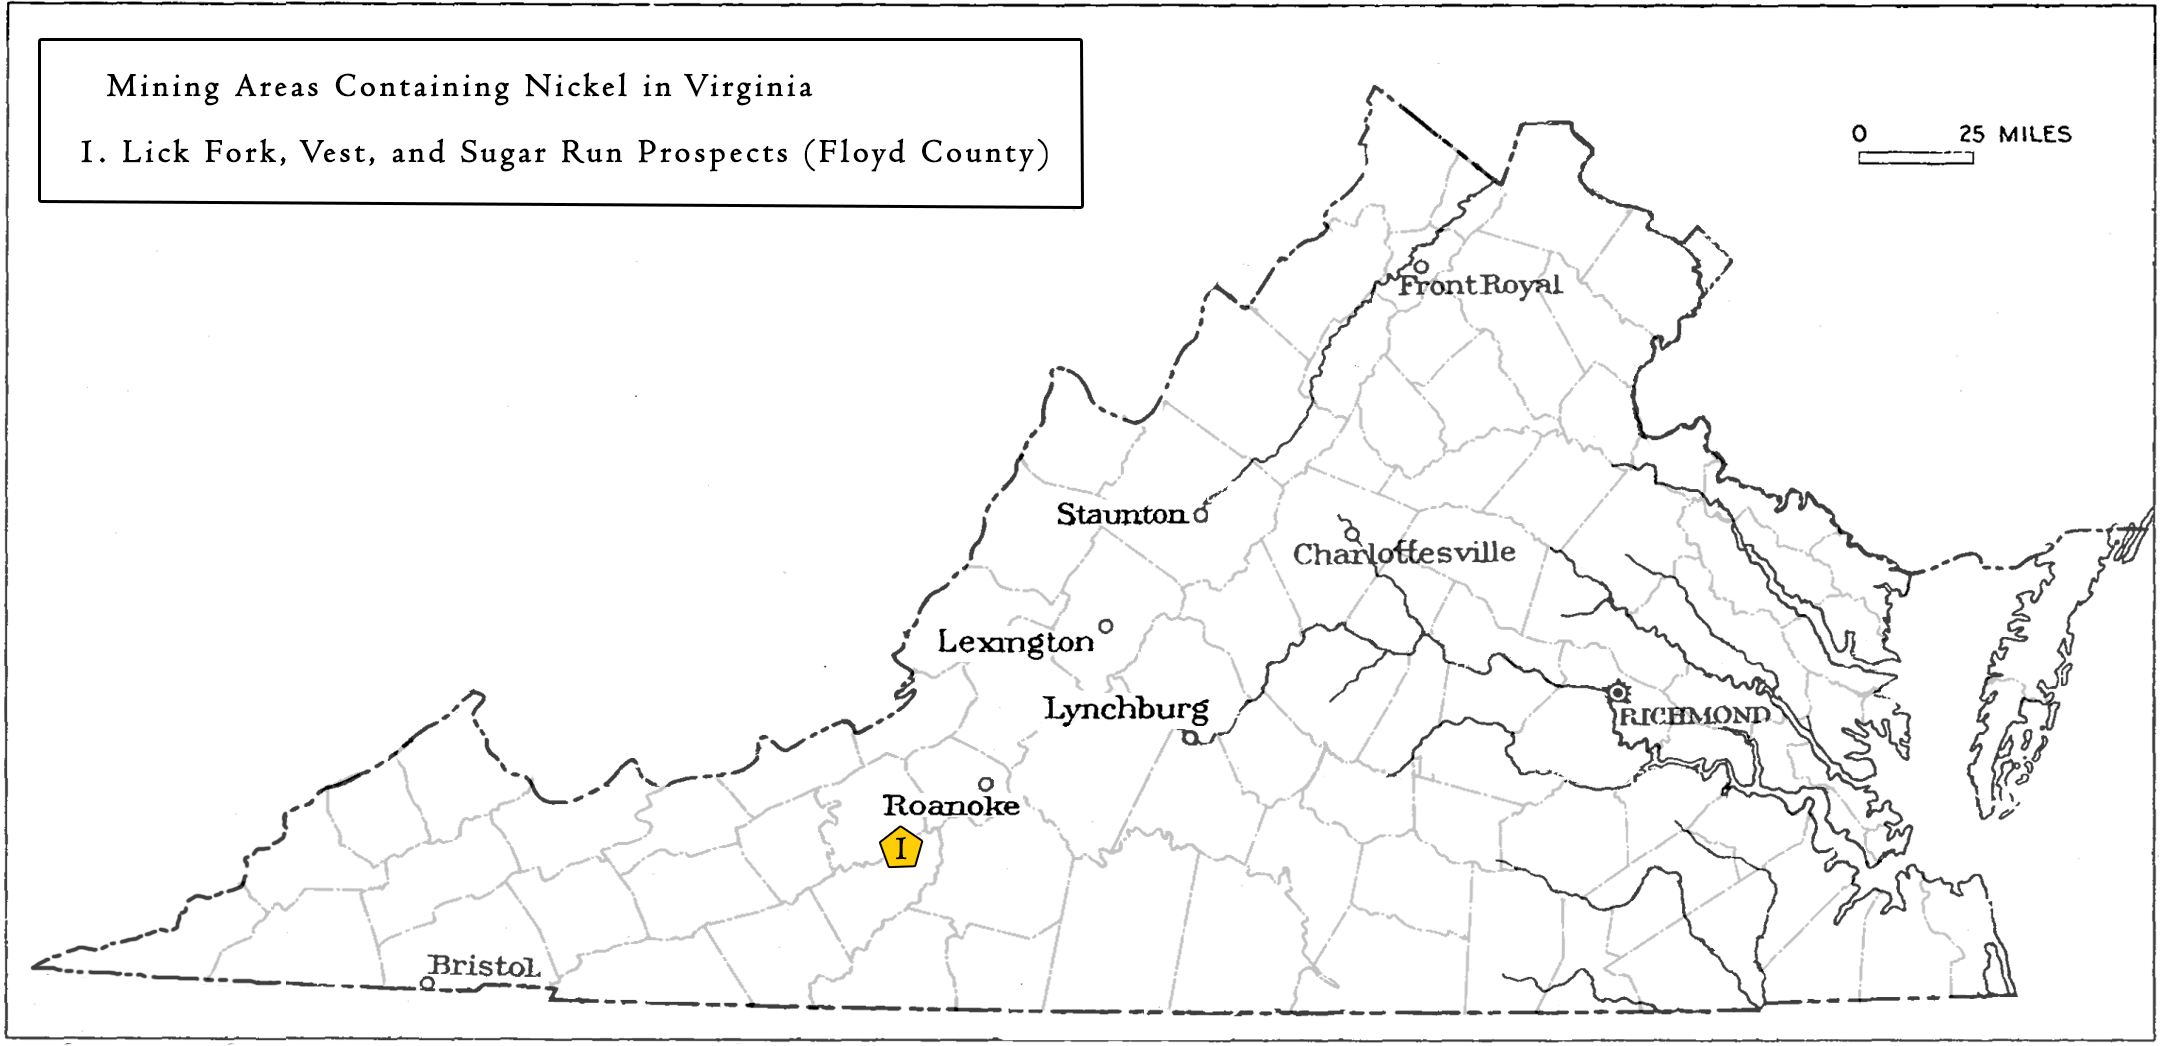 Nickel mines and prospects in Virginia